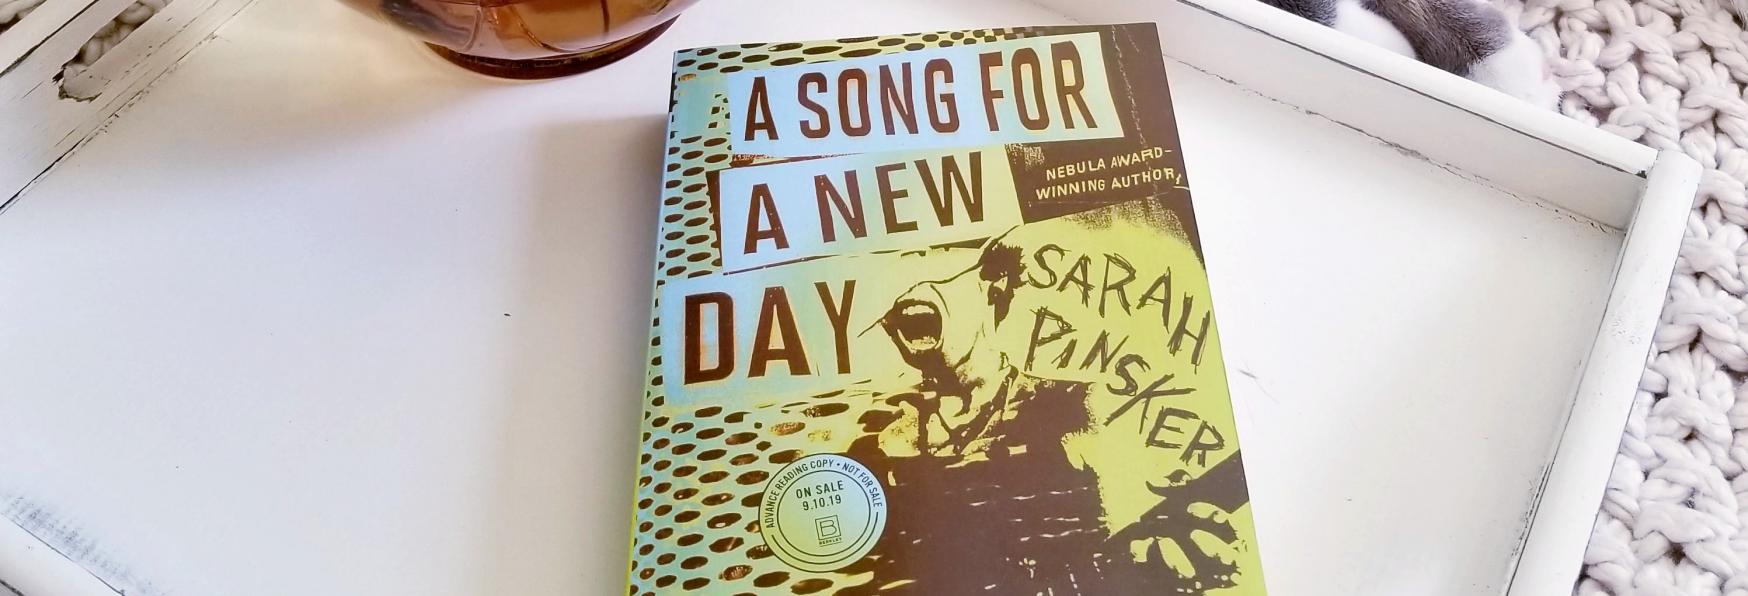 sarah pinsker song for a new day